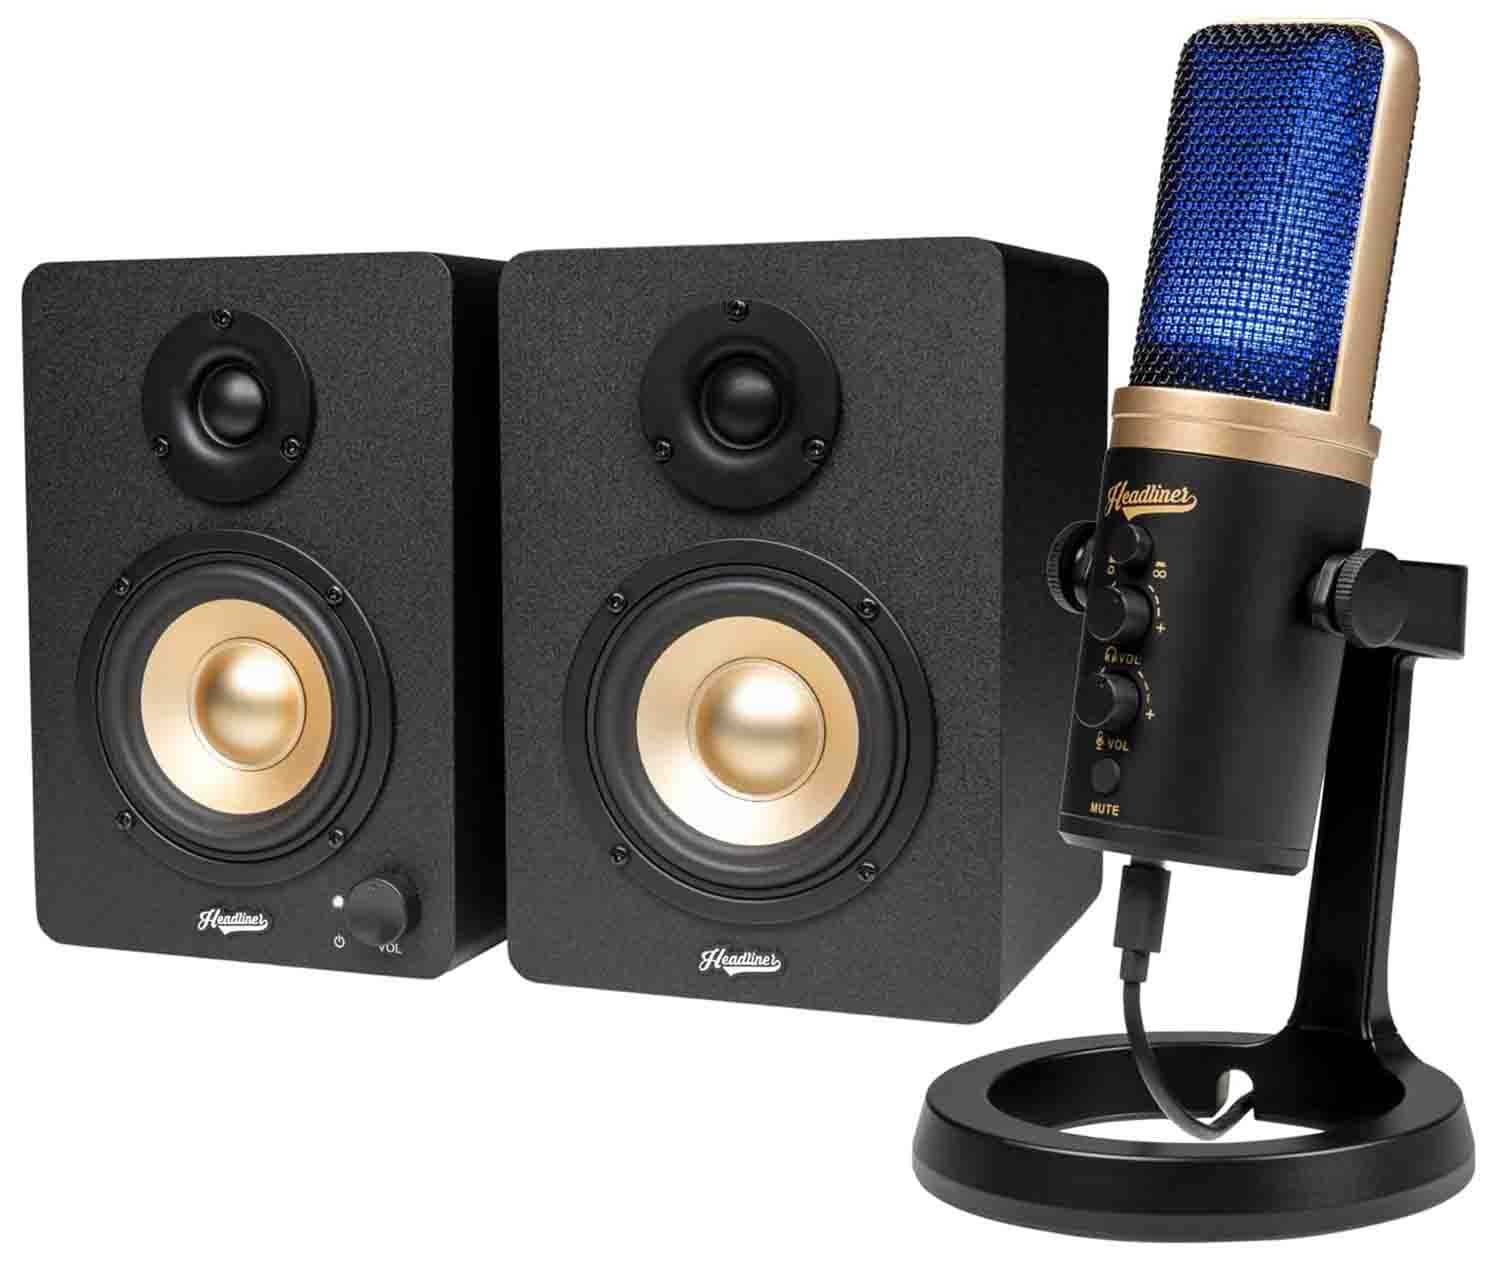 Headliner HL90980 HD3 Recording Package Monitors and Roxy USB Microphone Bundle - Hollywood DJ